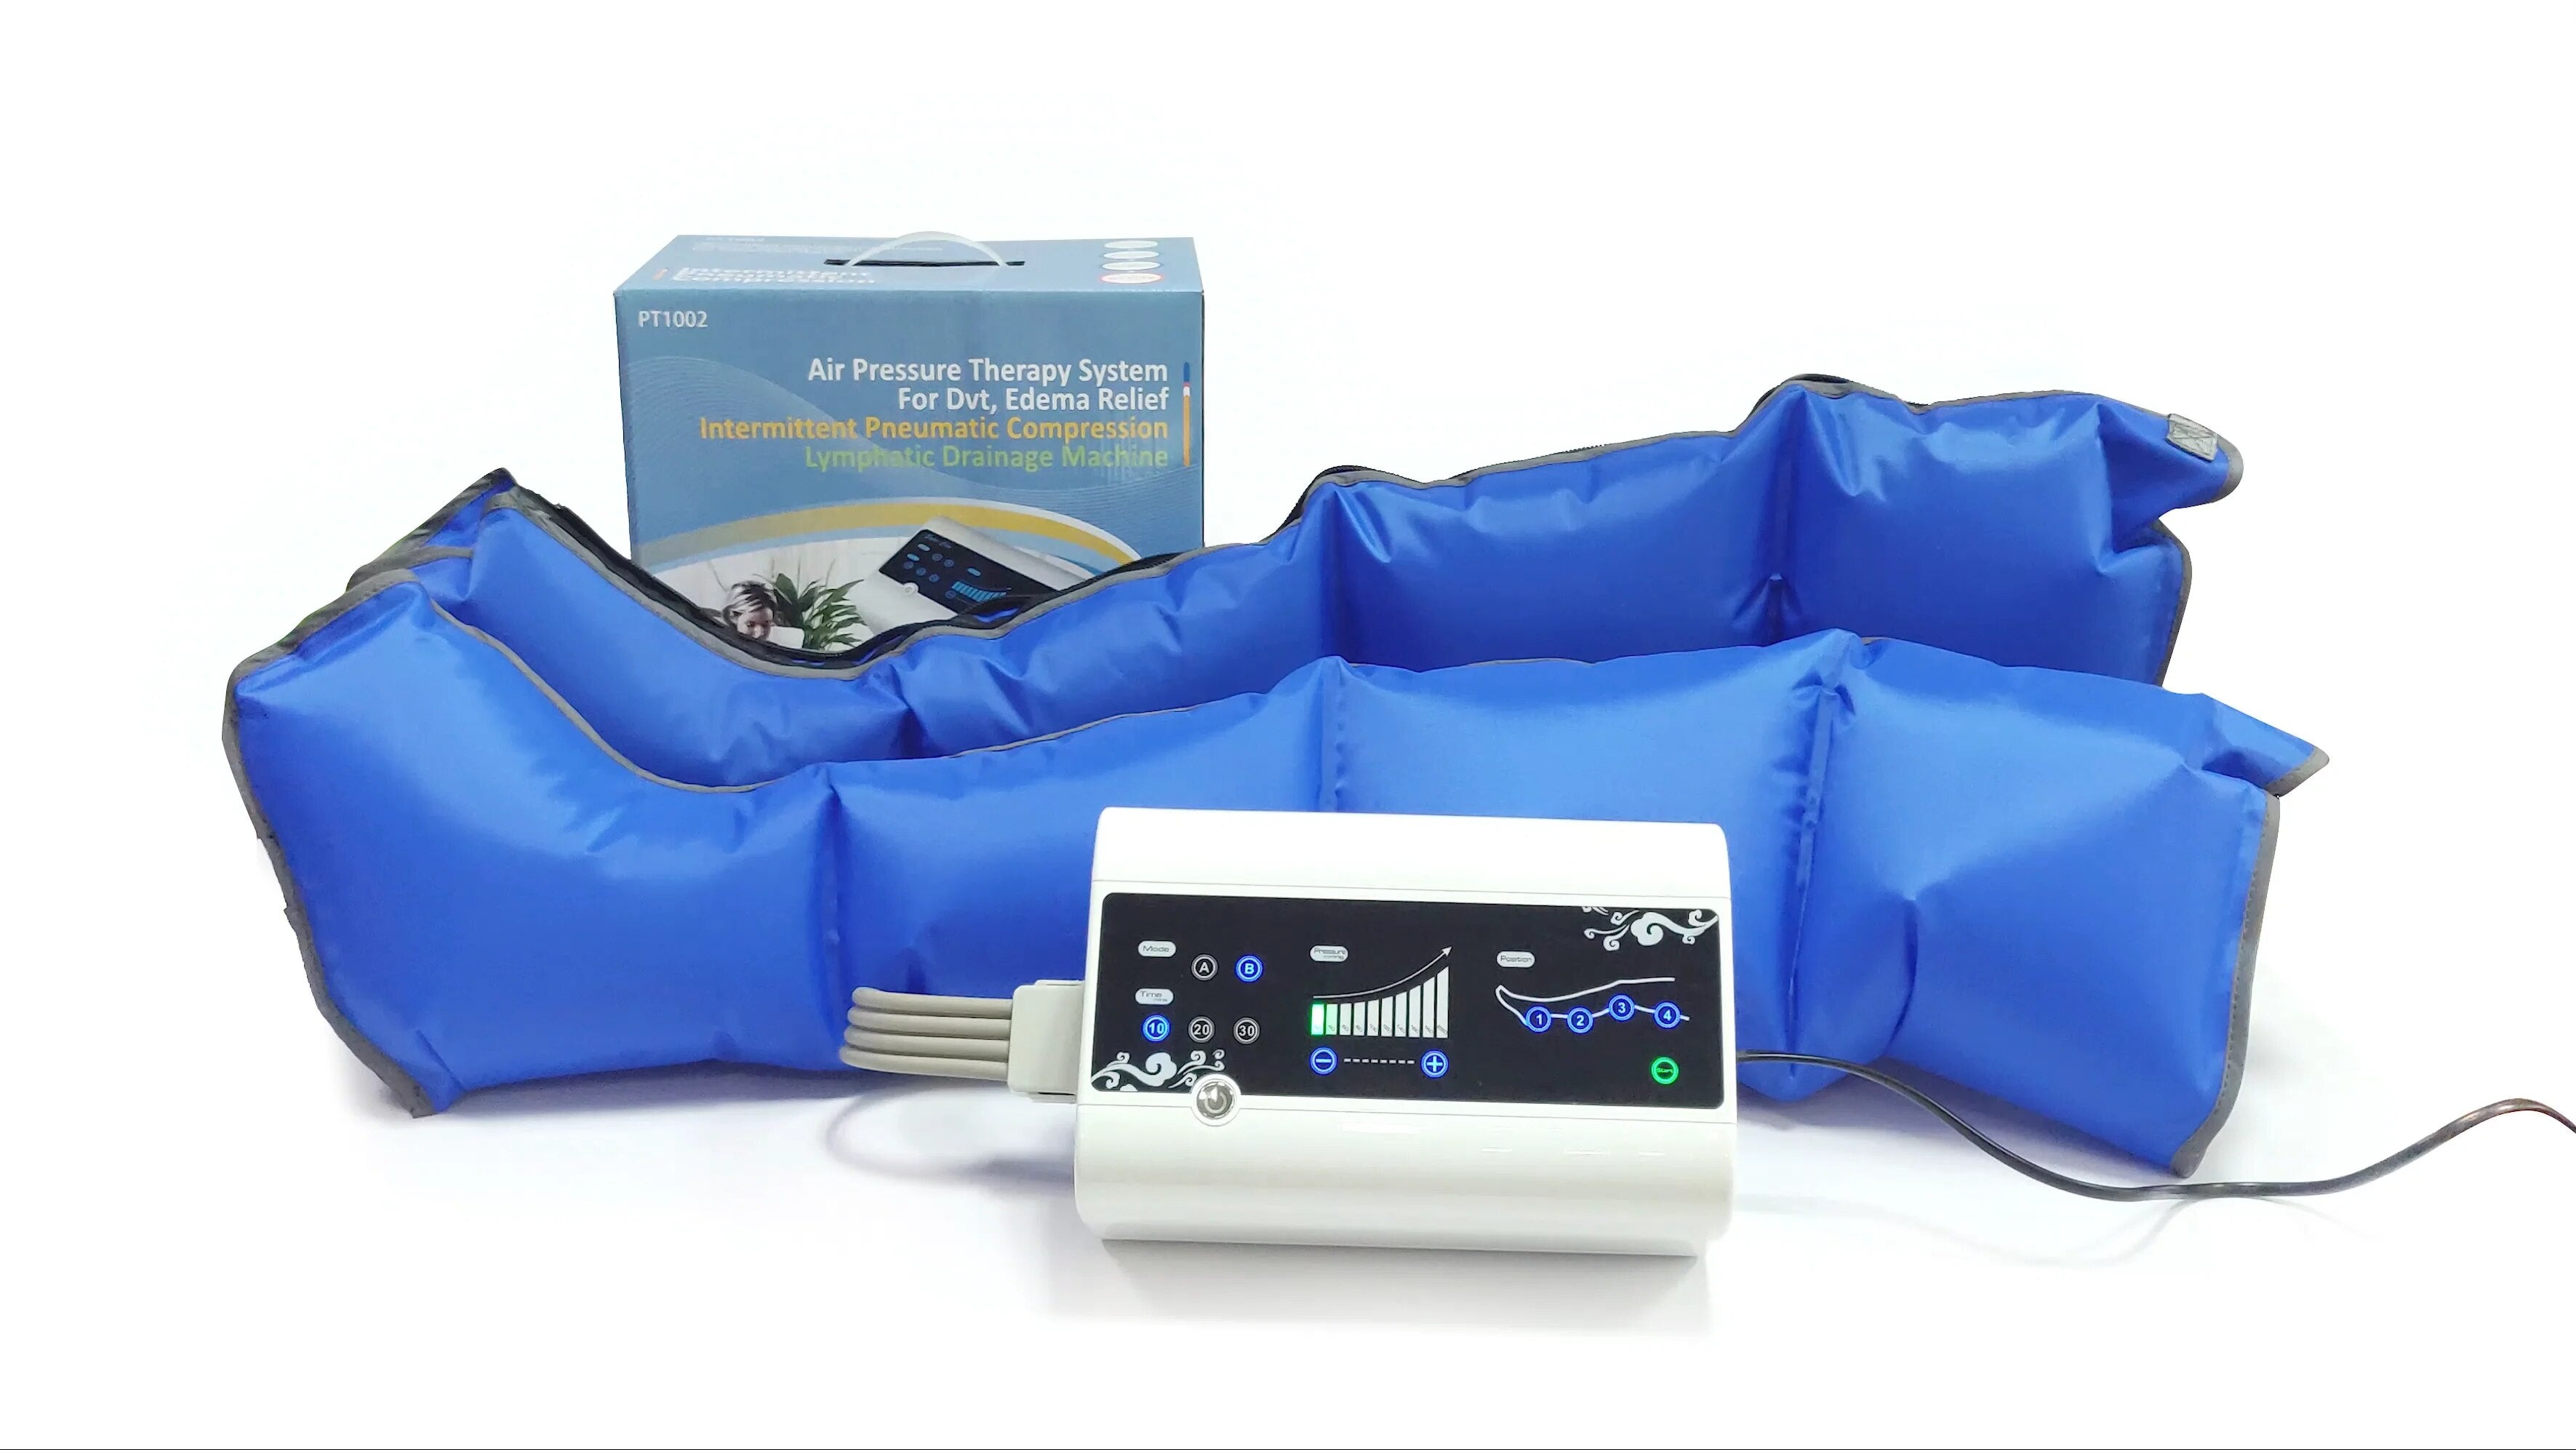 Massage therapy equipment